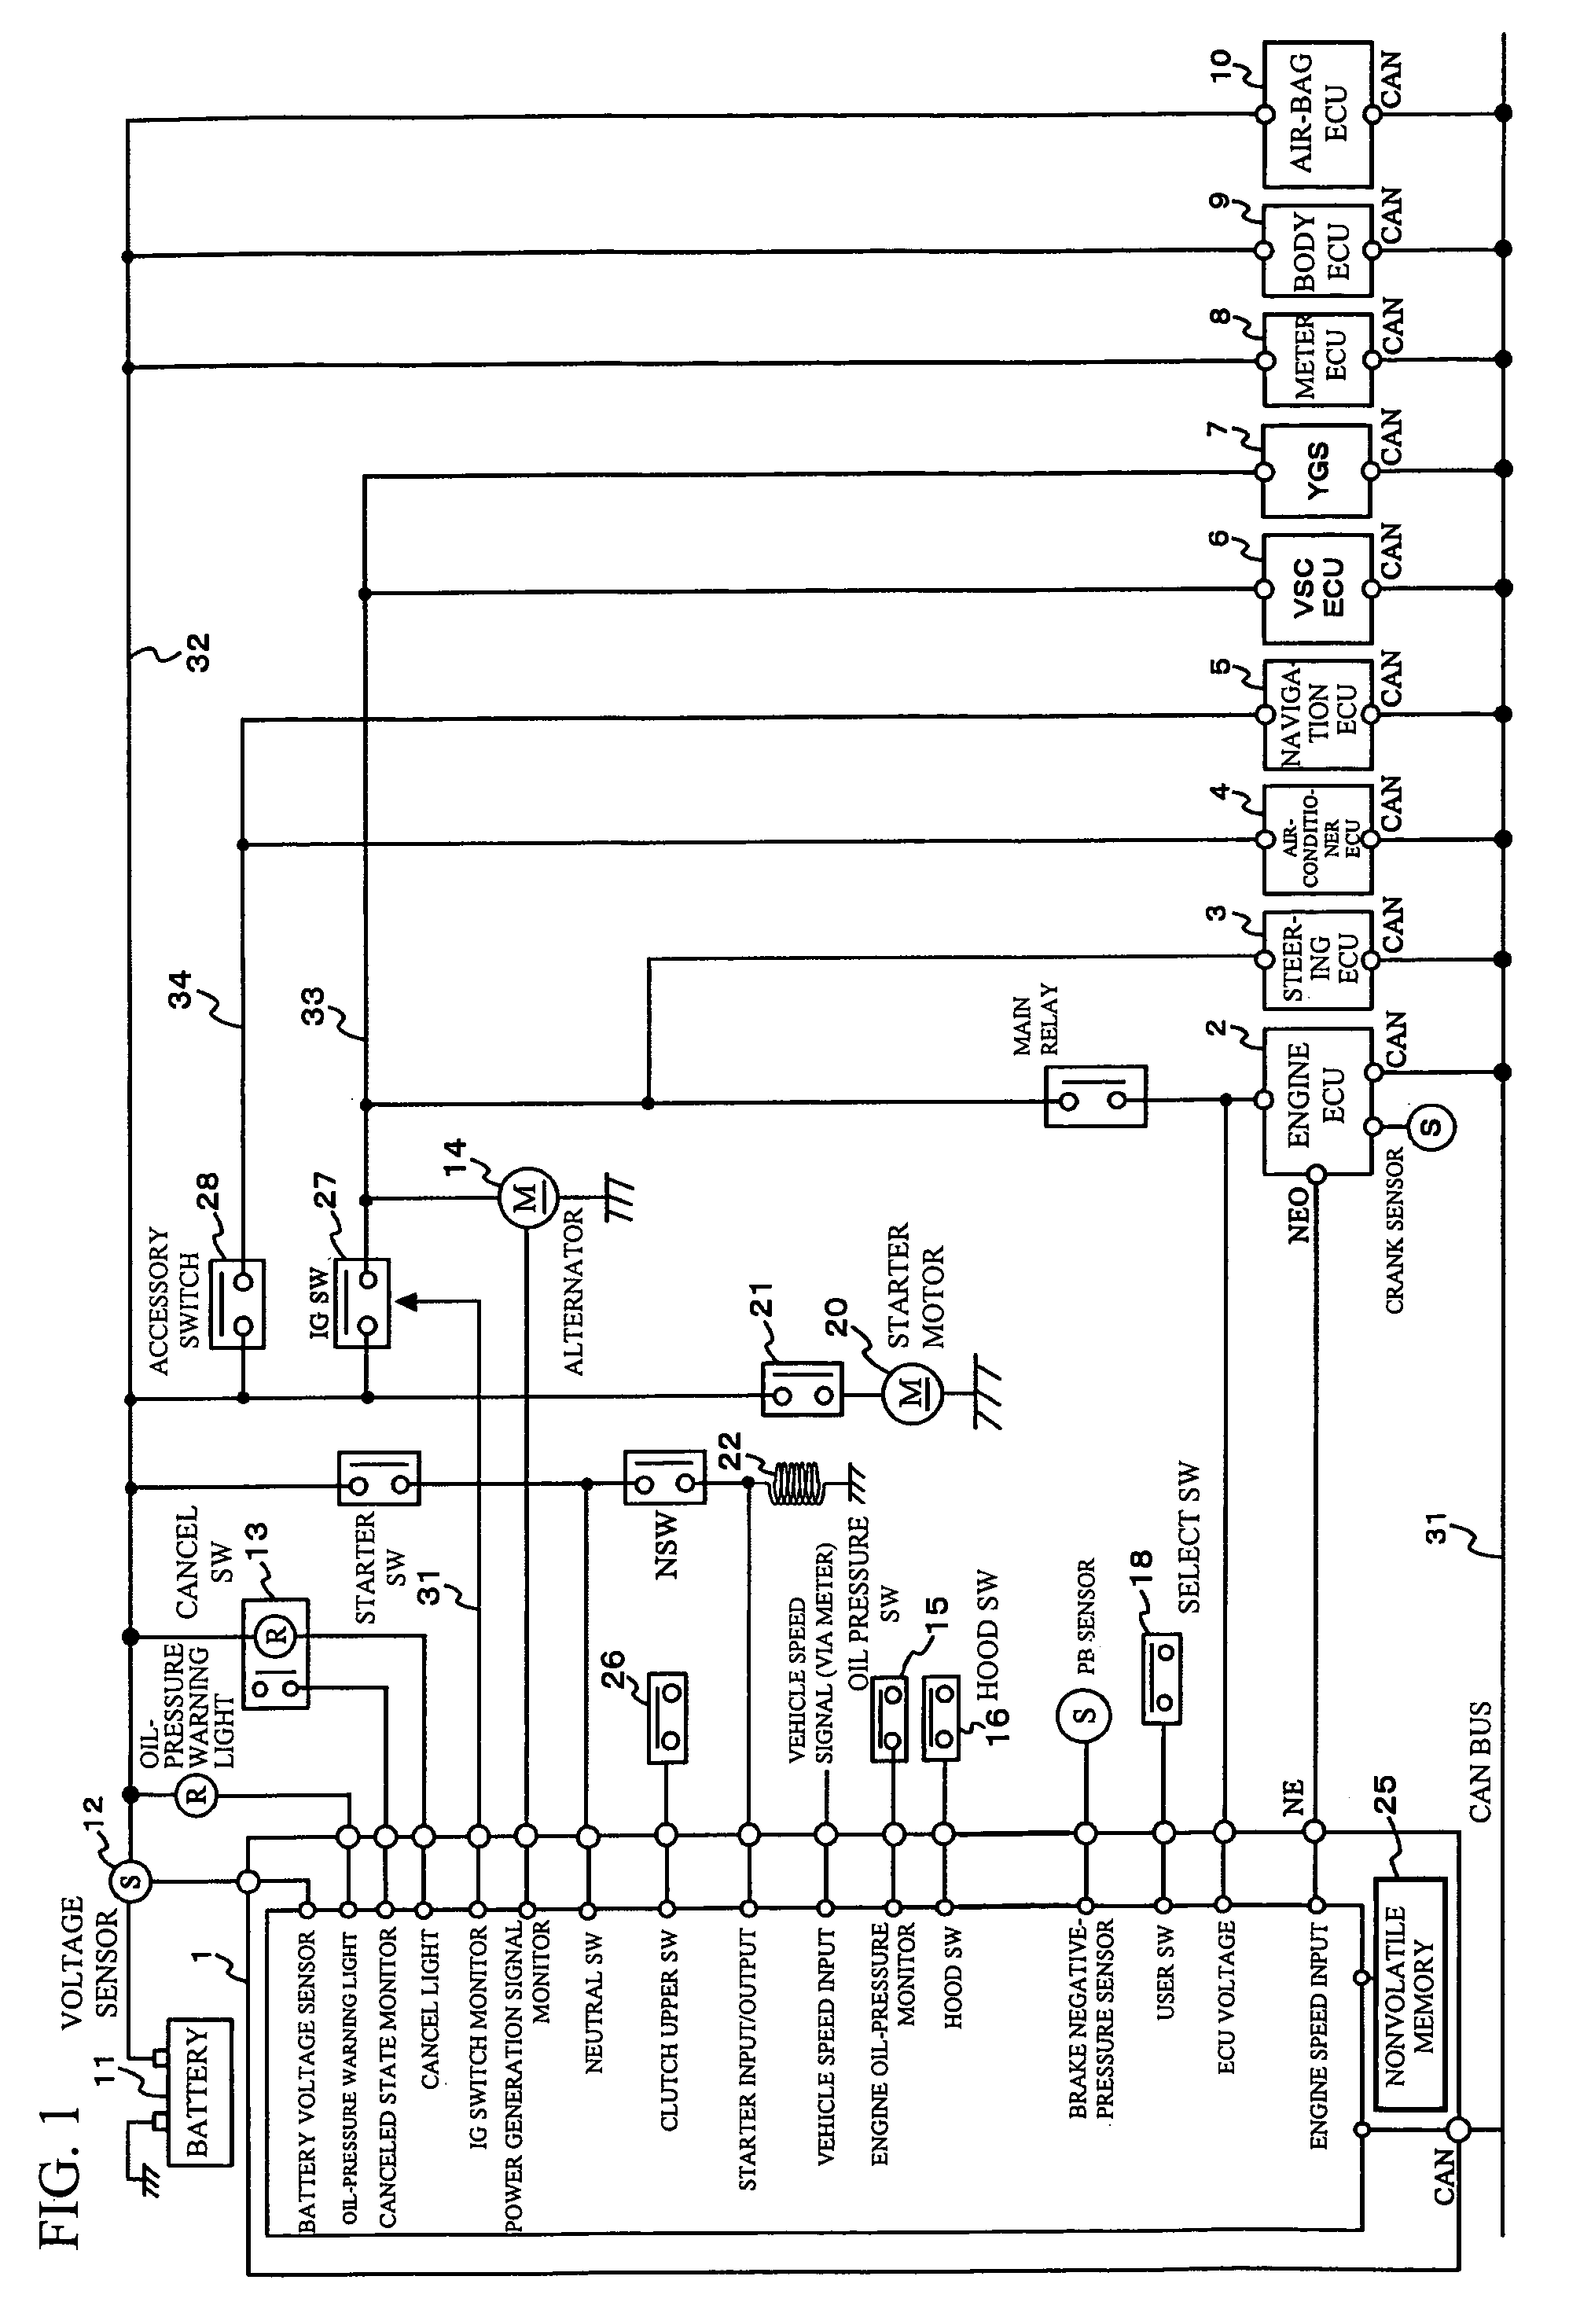 Eco-run control device and method for resetting the same